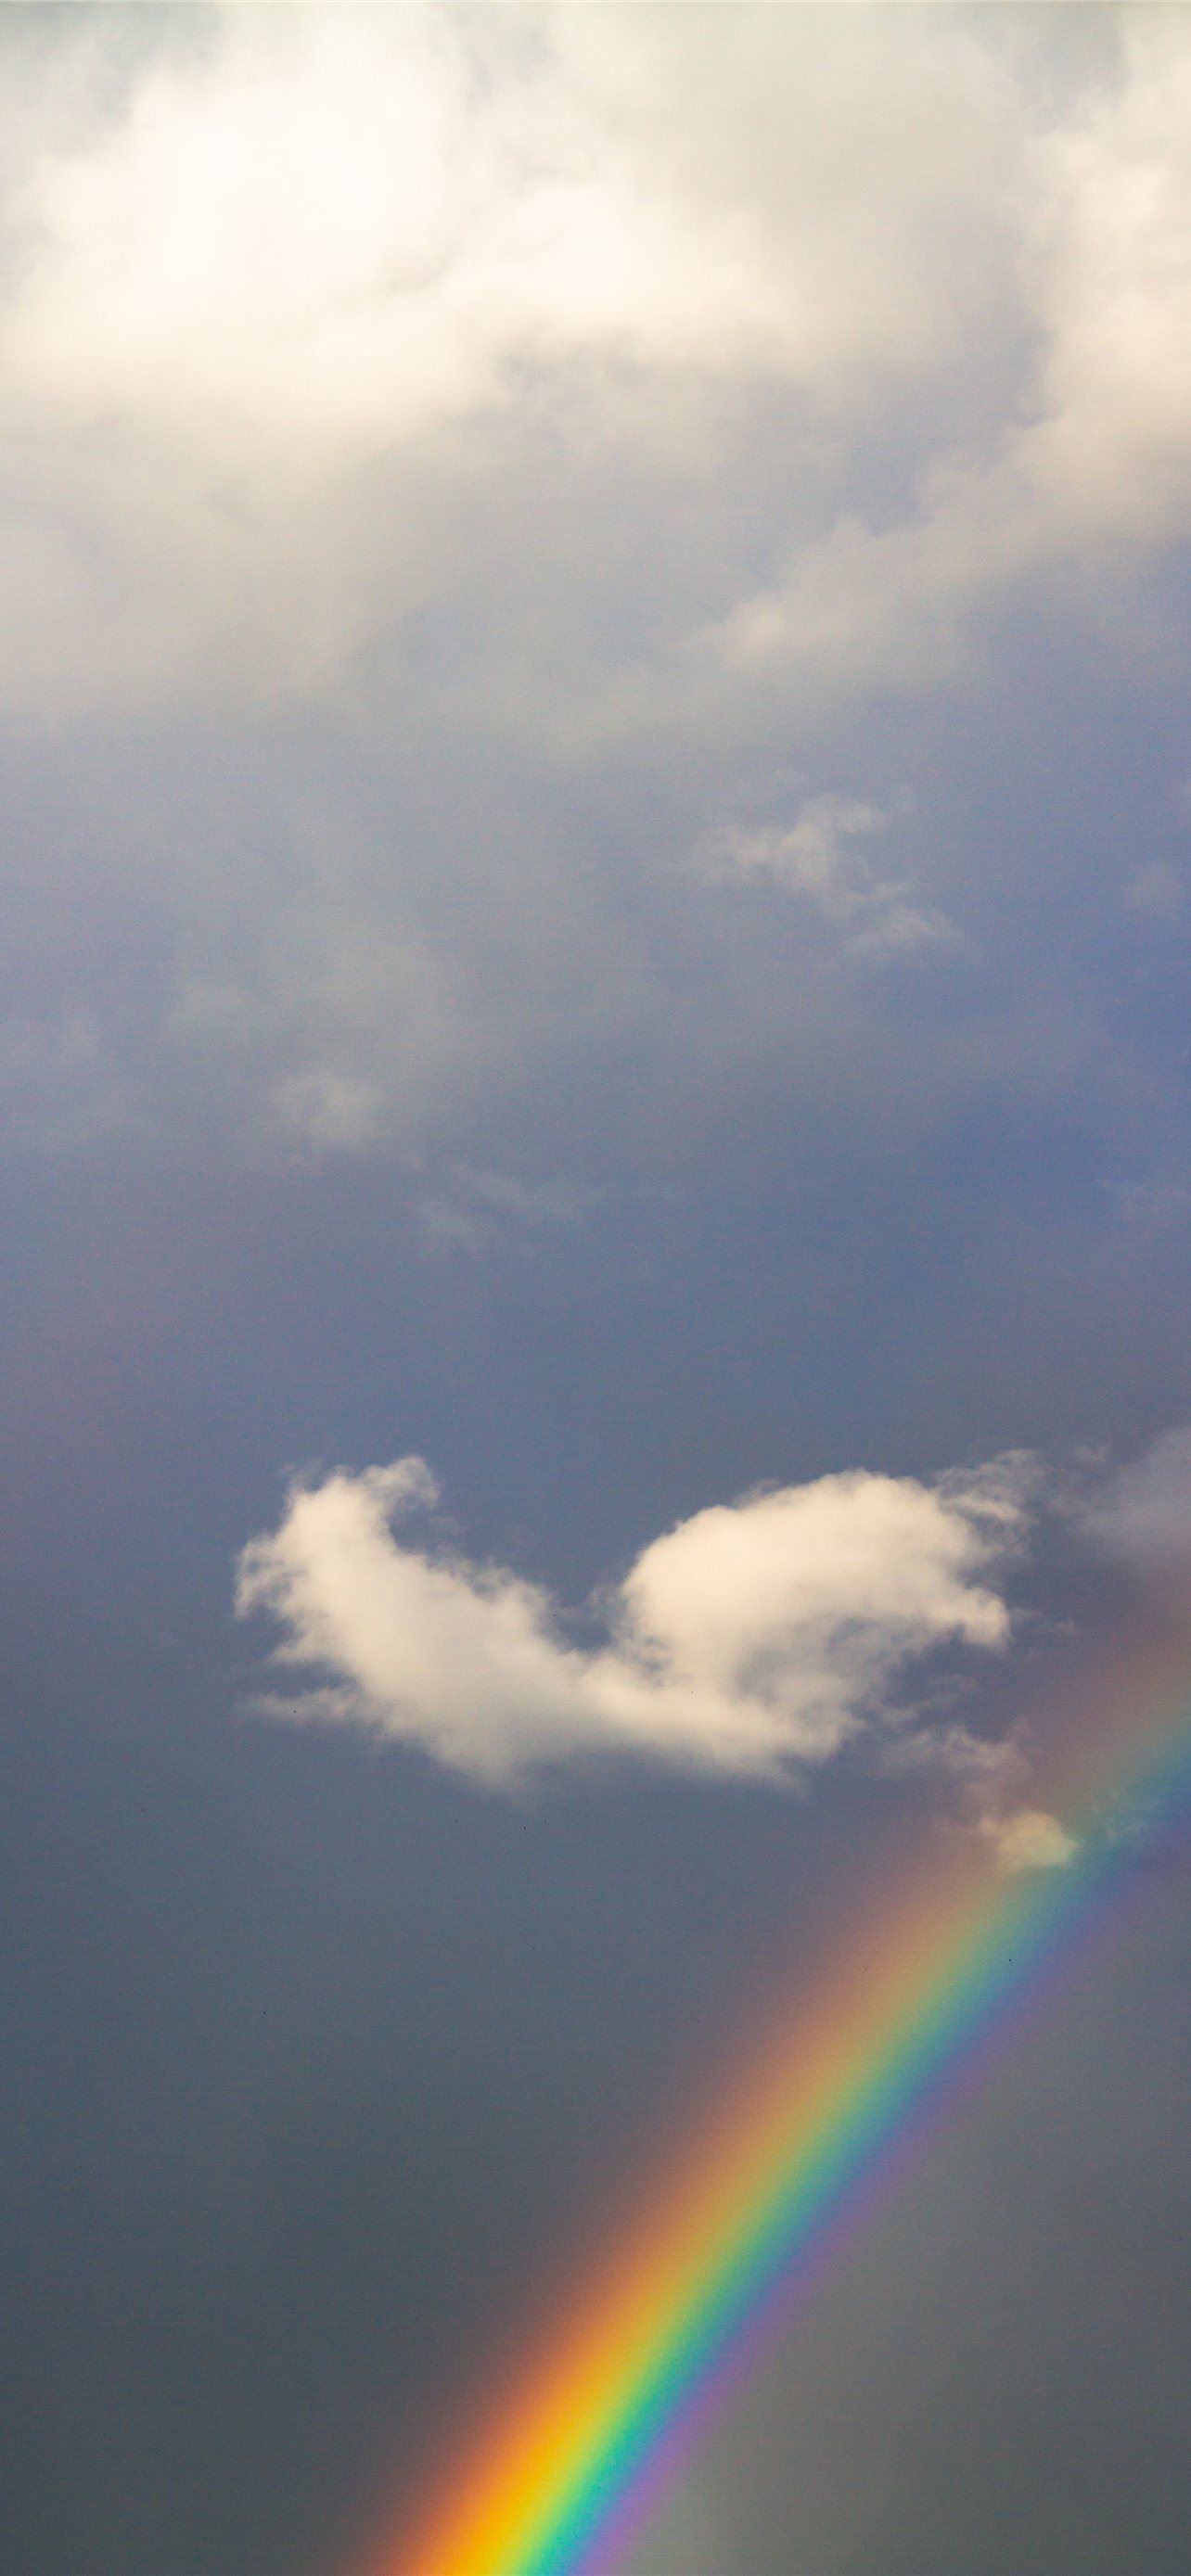 A rainbow in the sky with a cloud in the shape of a heart. - Rainbows